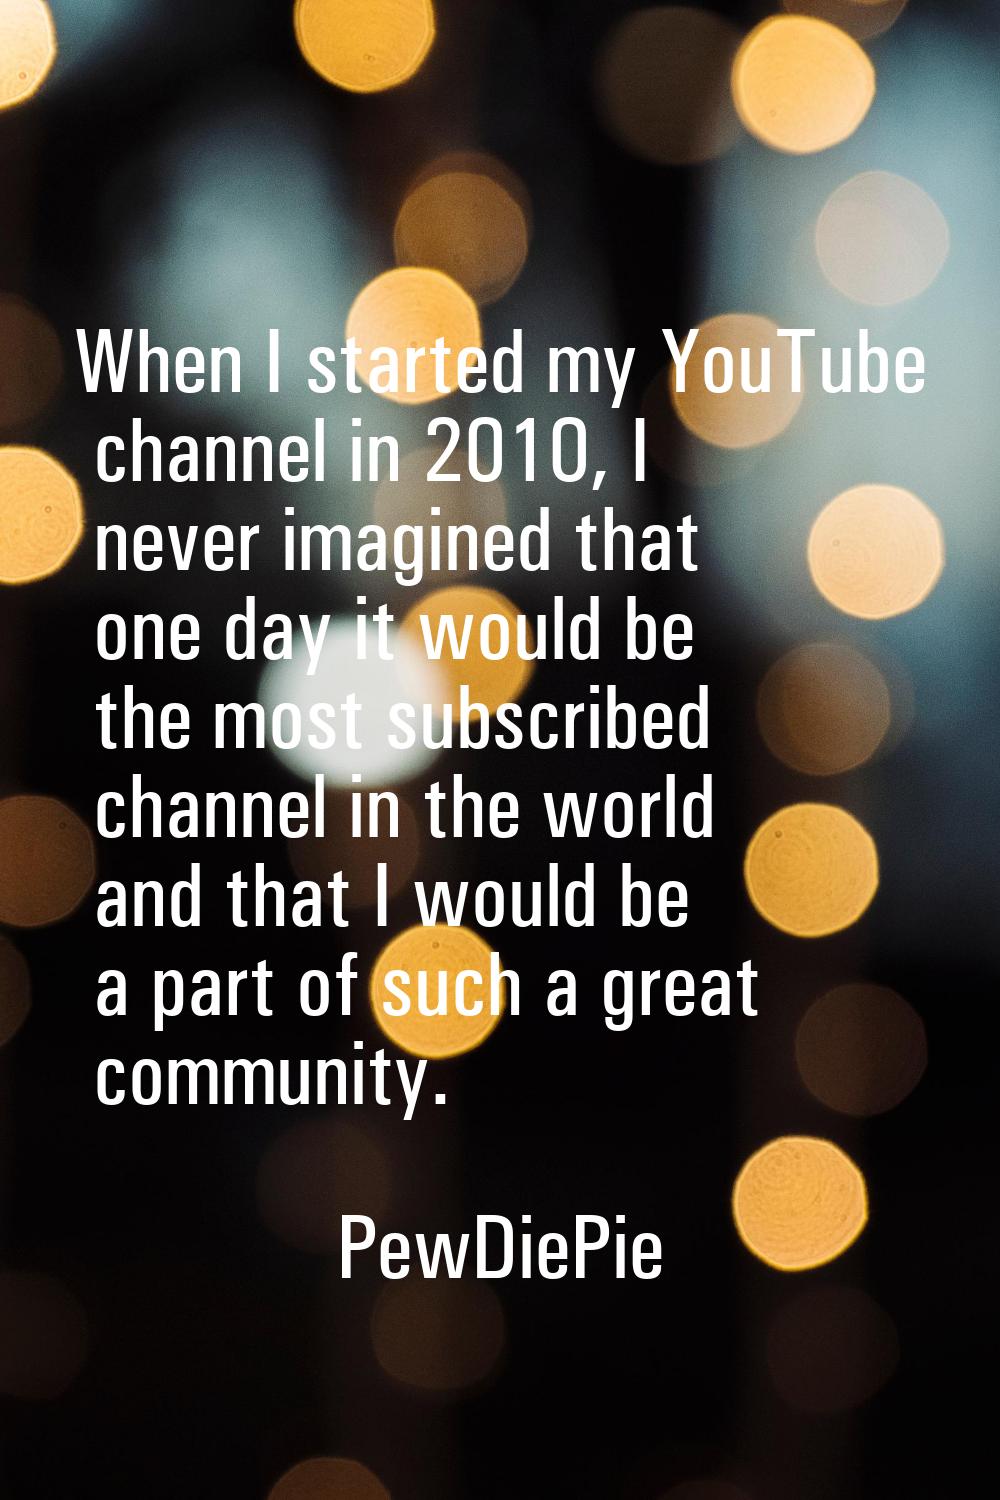 When I started my YouTube channel in 2010, I never imagined that one day it would be the most subsc